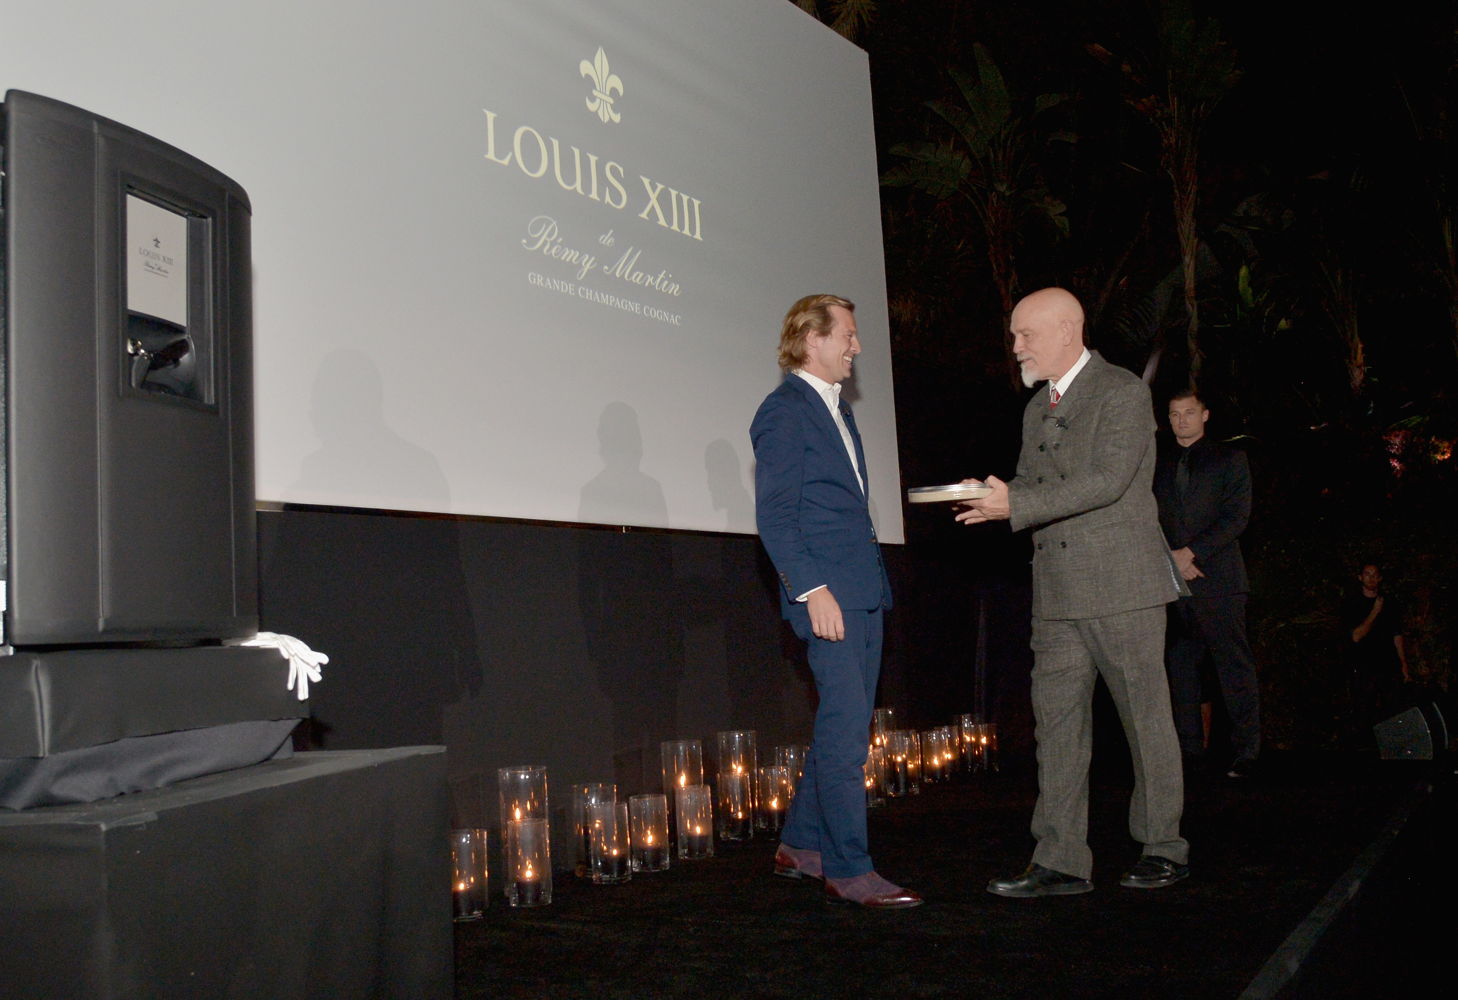 John Malkovich and LOUIS XIII CEO Ludovic Du Plessis